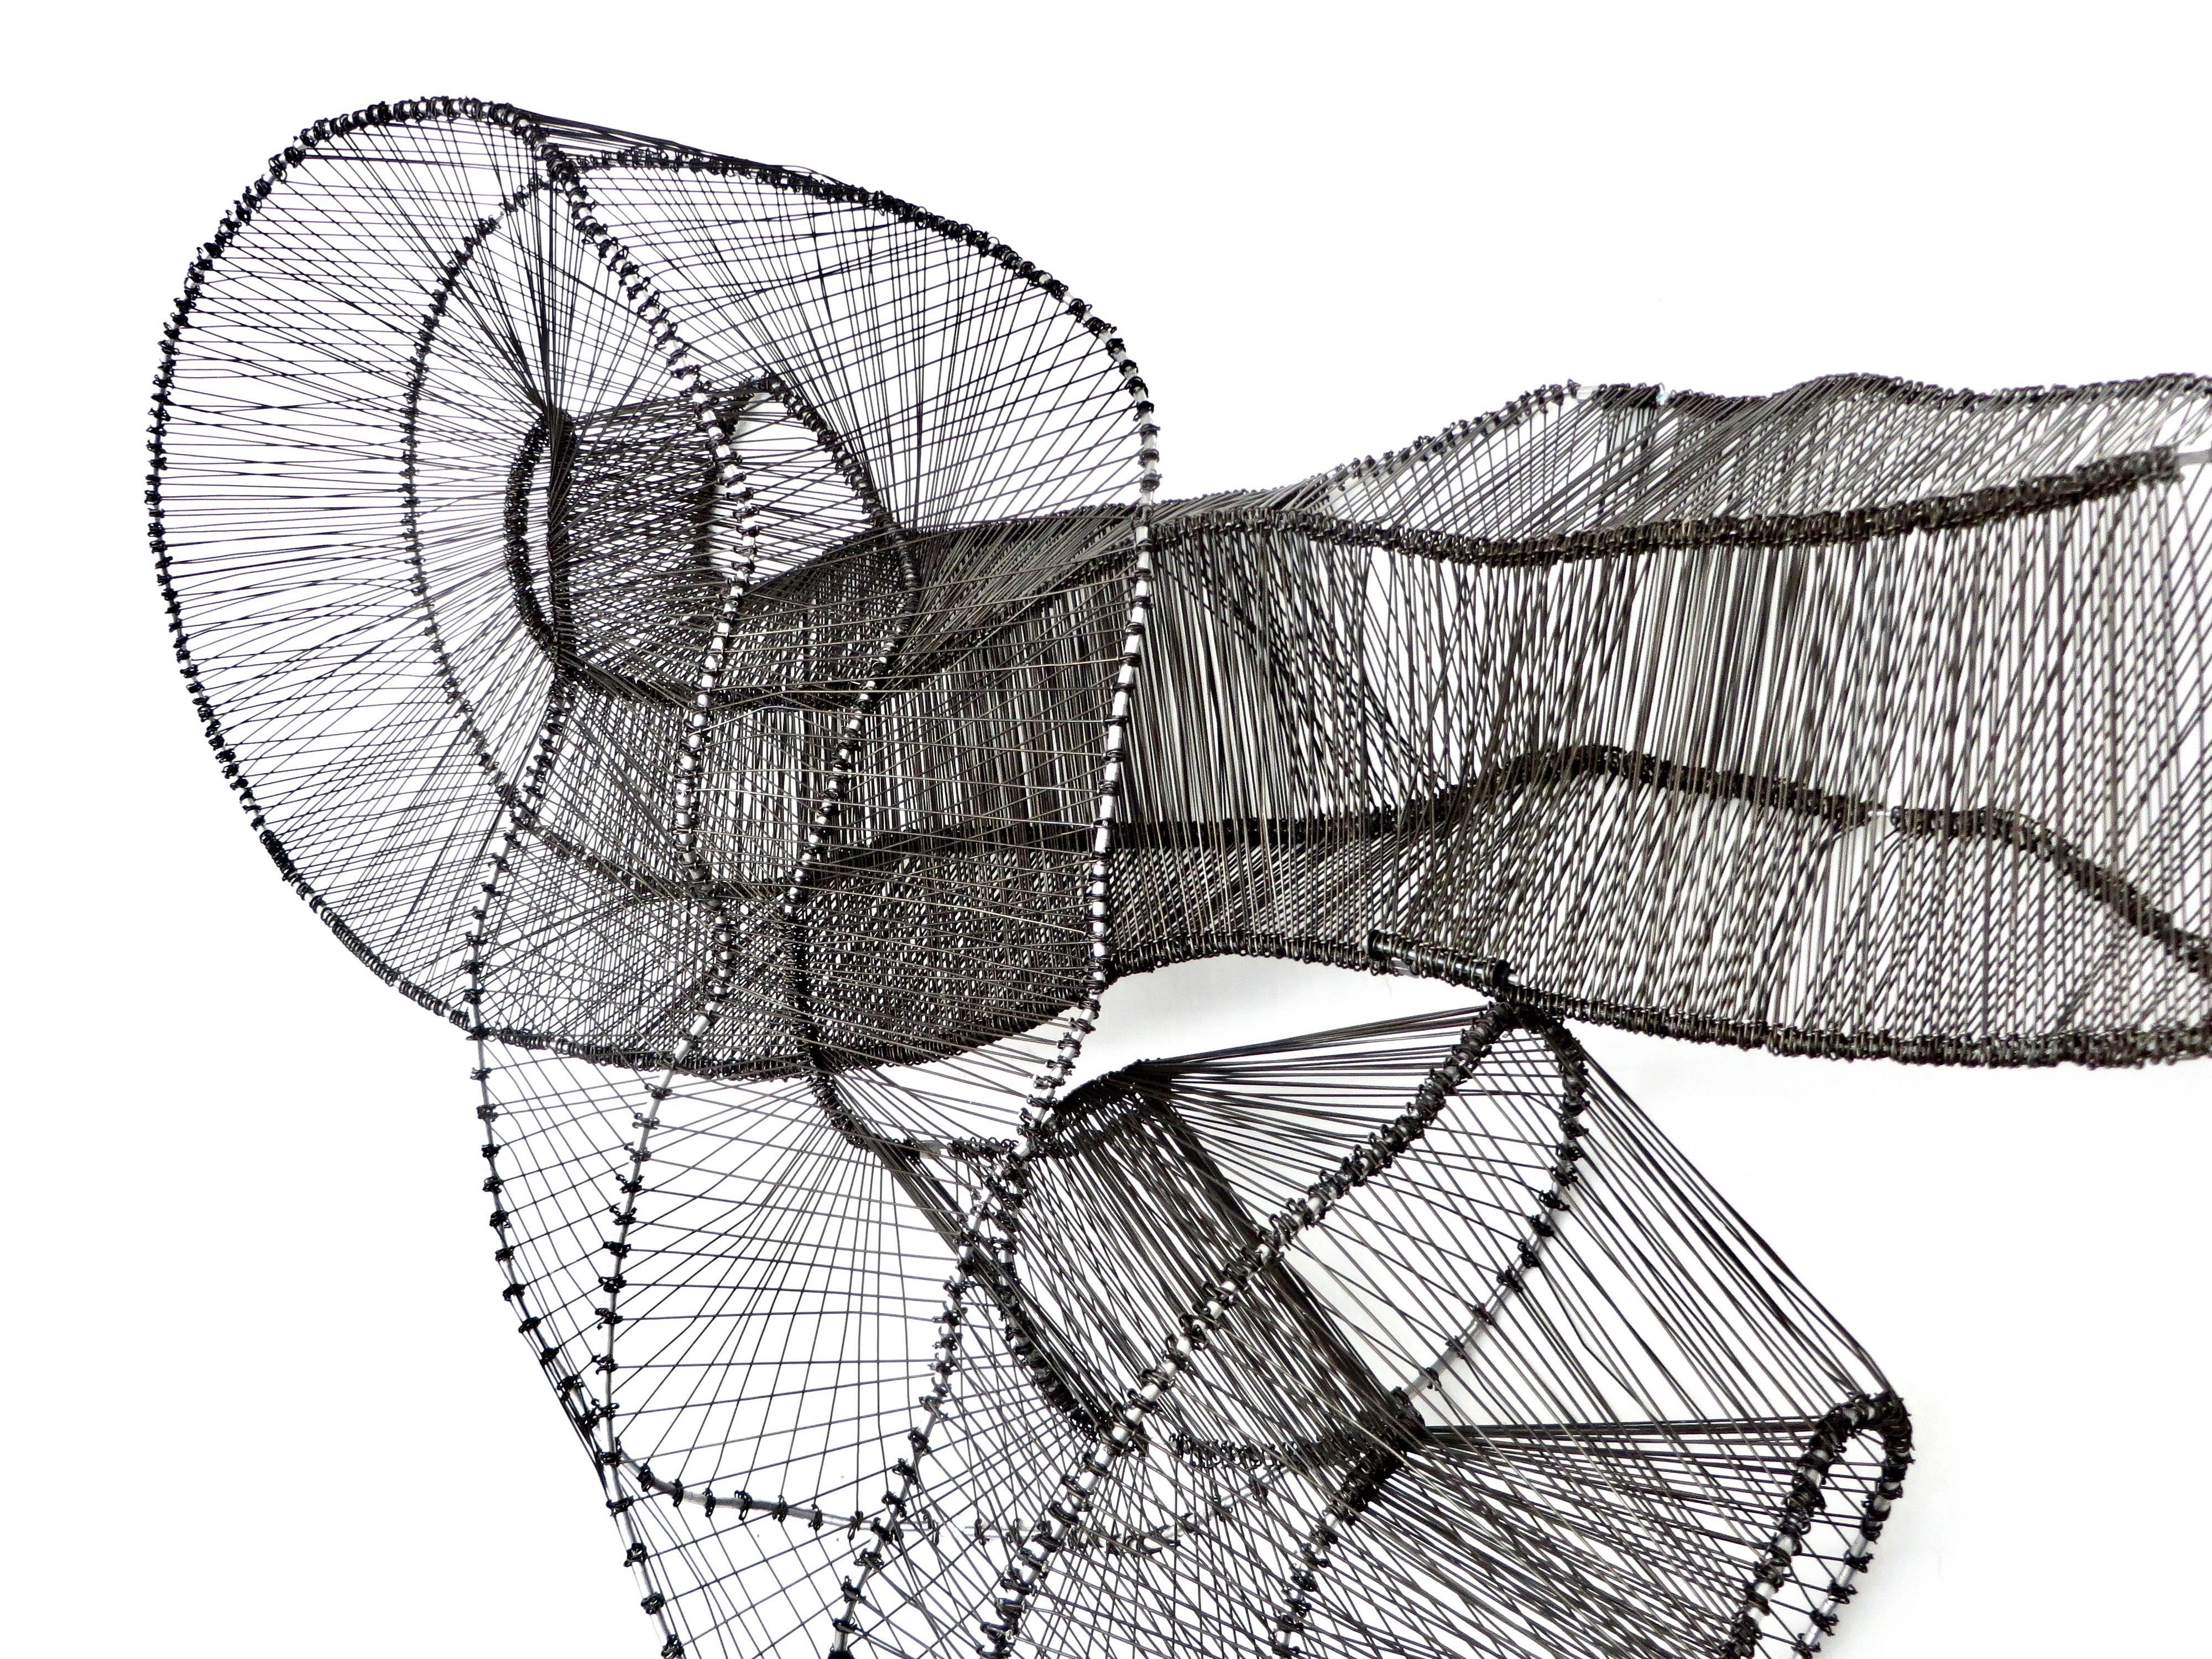 Chicago based artist Eric Gushee, has created a body of work called the Emergence Series. This sculpture is a piece unique variation, incorporating the Mobius strip as a design structure. Made of stainless steel and black anodized steel wire, the